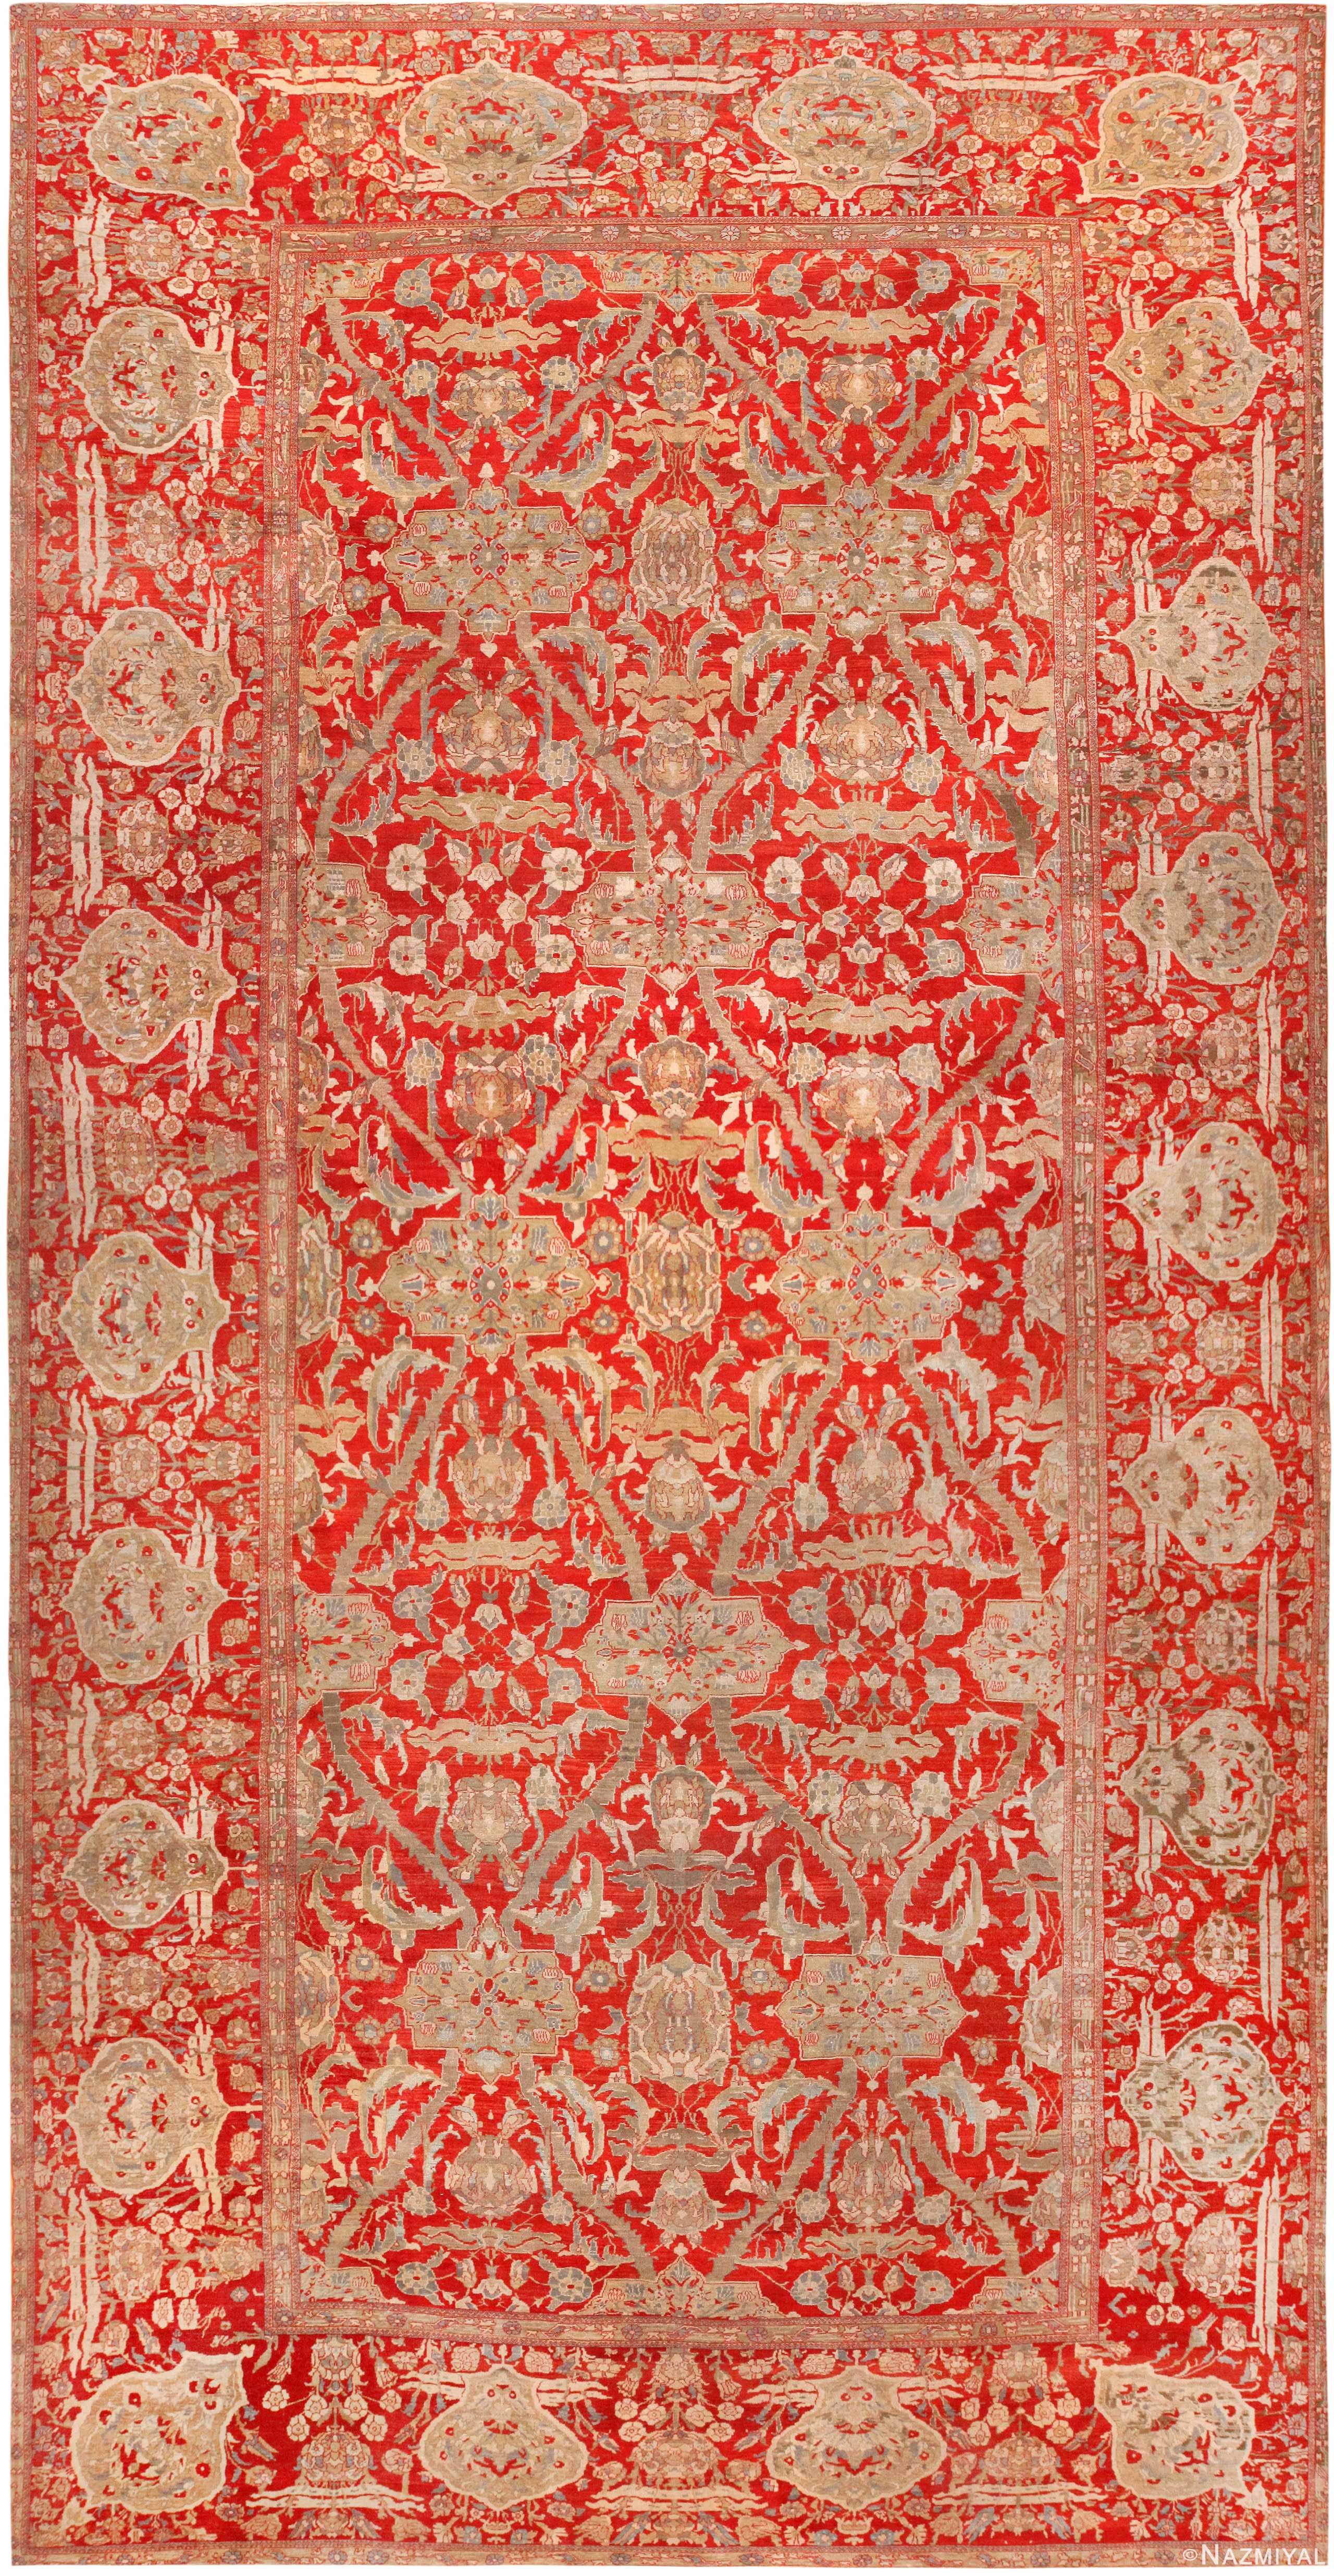 Sultanabad Rugs, Antique Sultanabad Persian Carpets